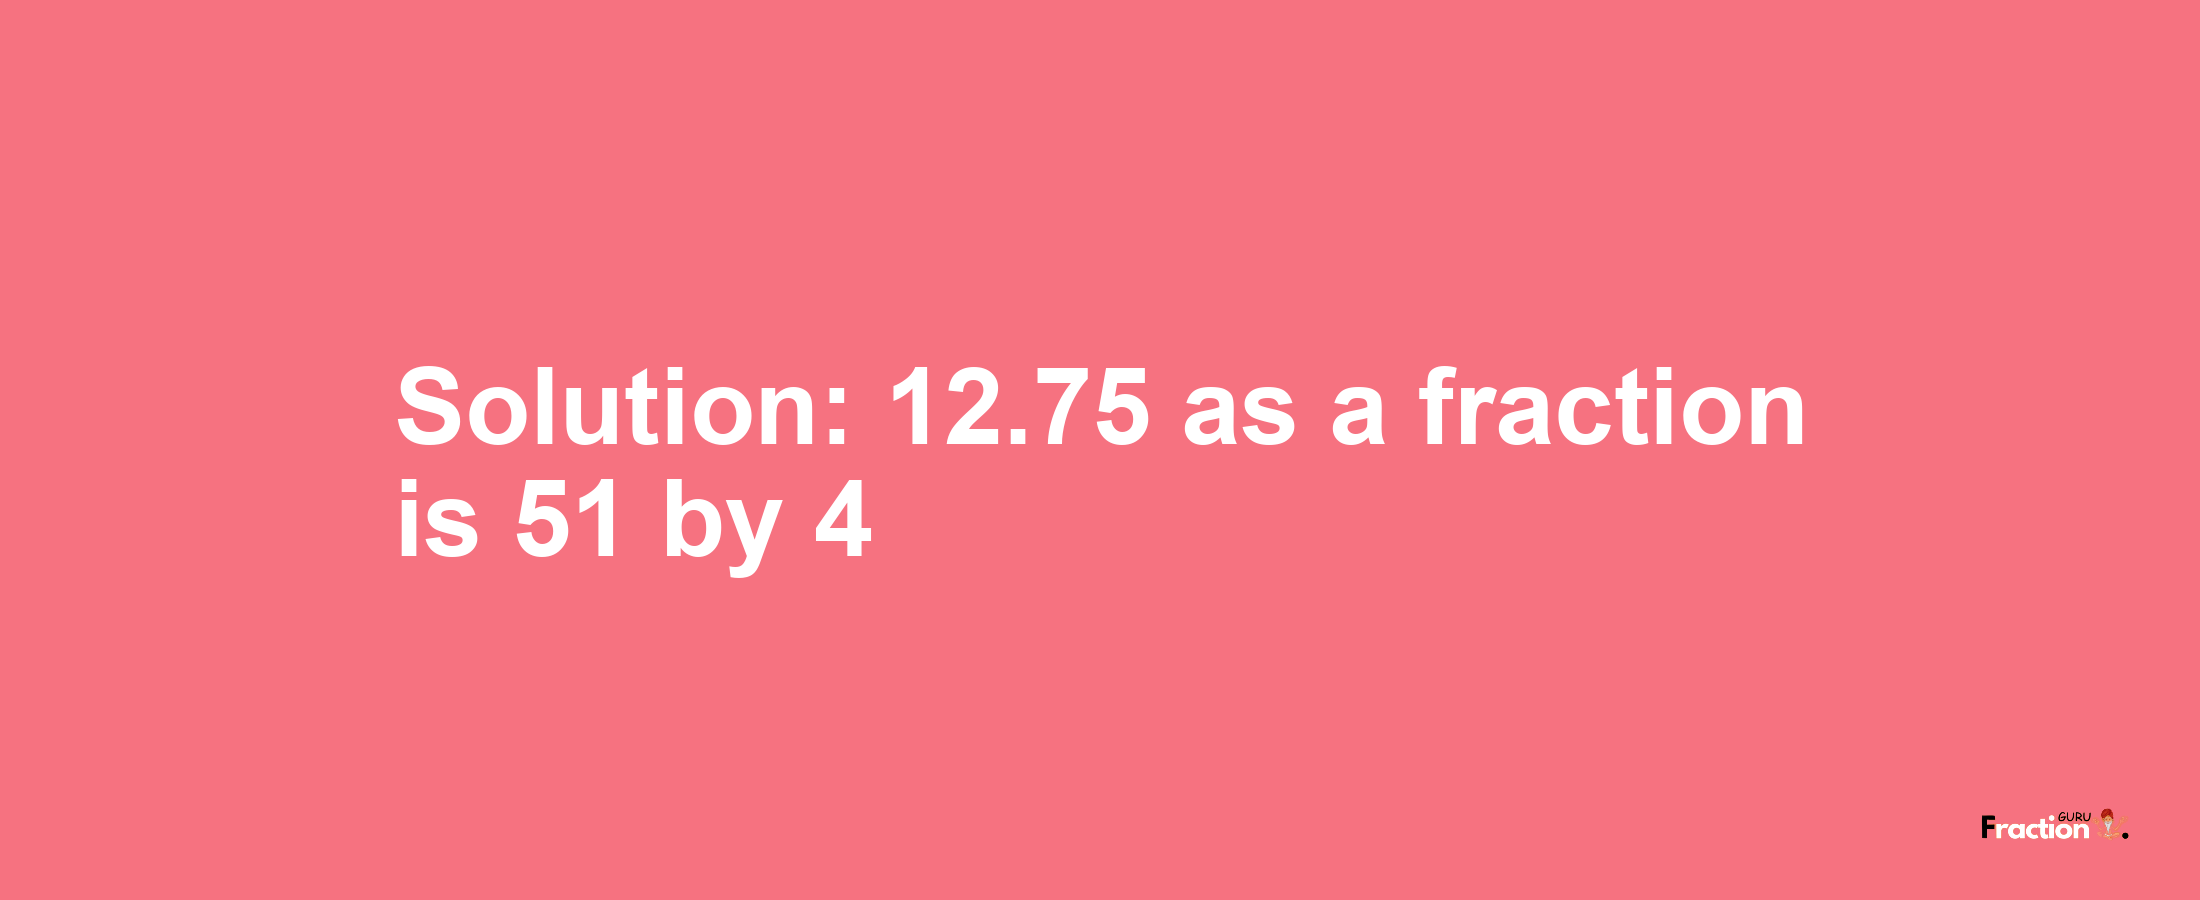 Solution:12.75 as a fraction is 51/4